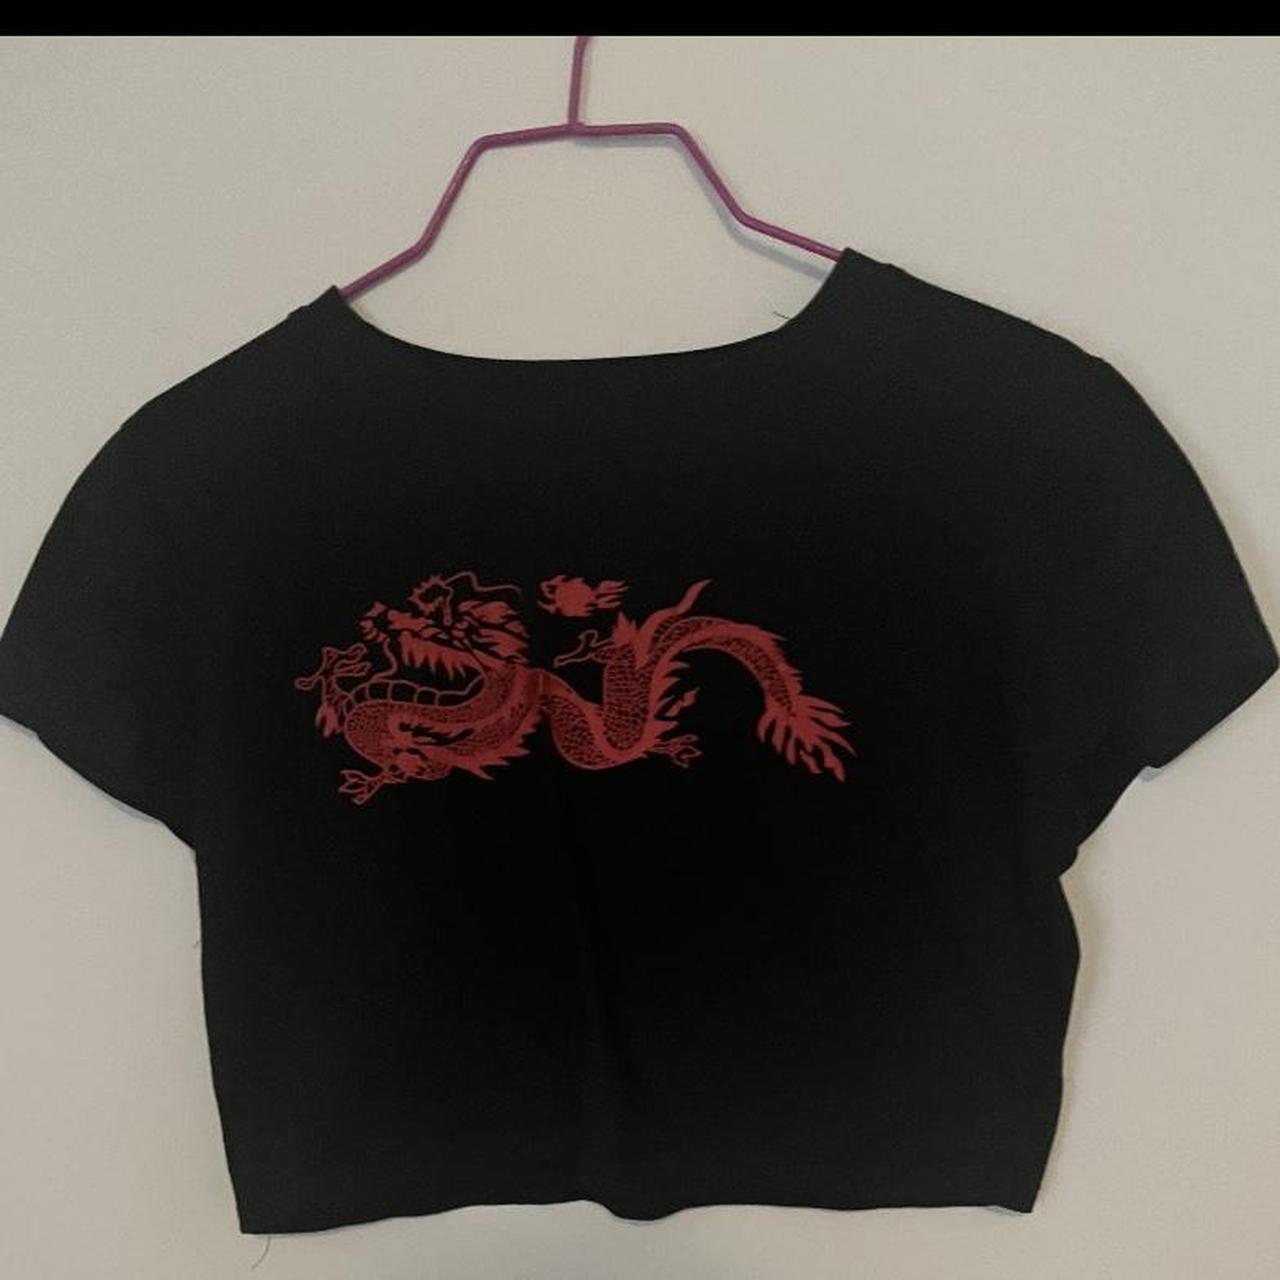 All Black Women's Red and Black Shirt